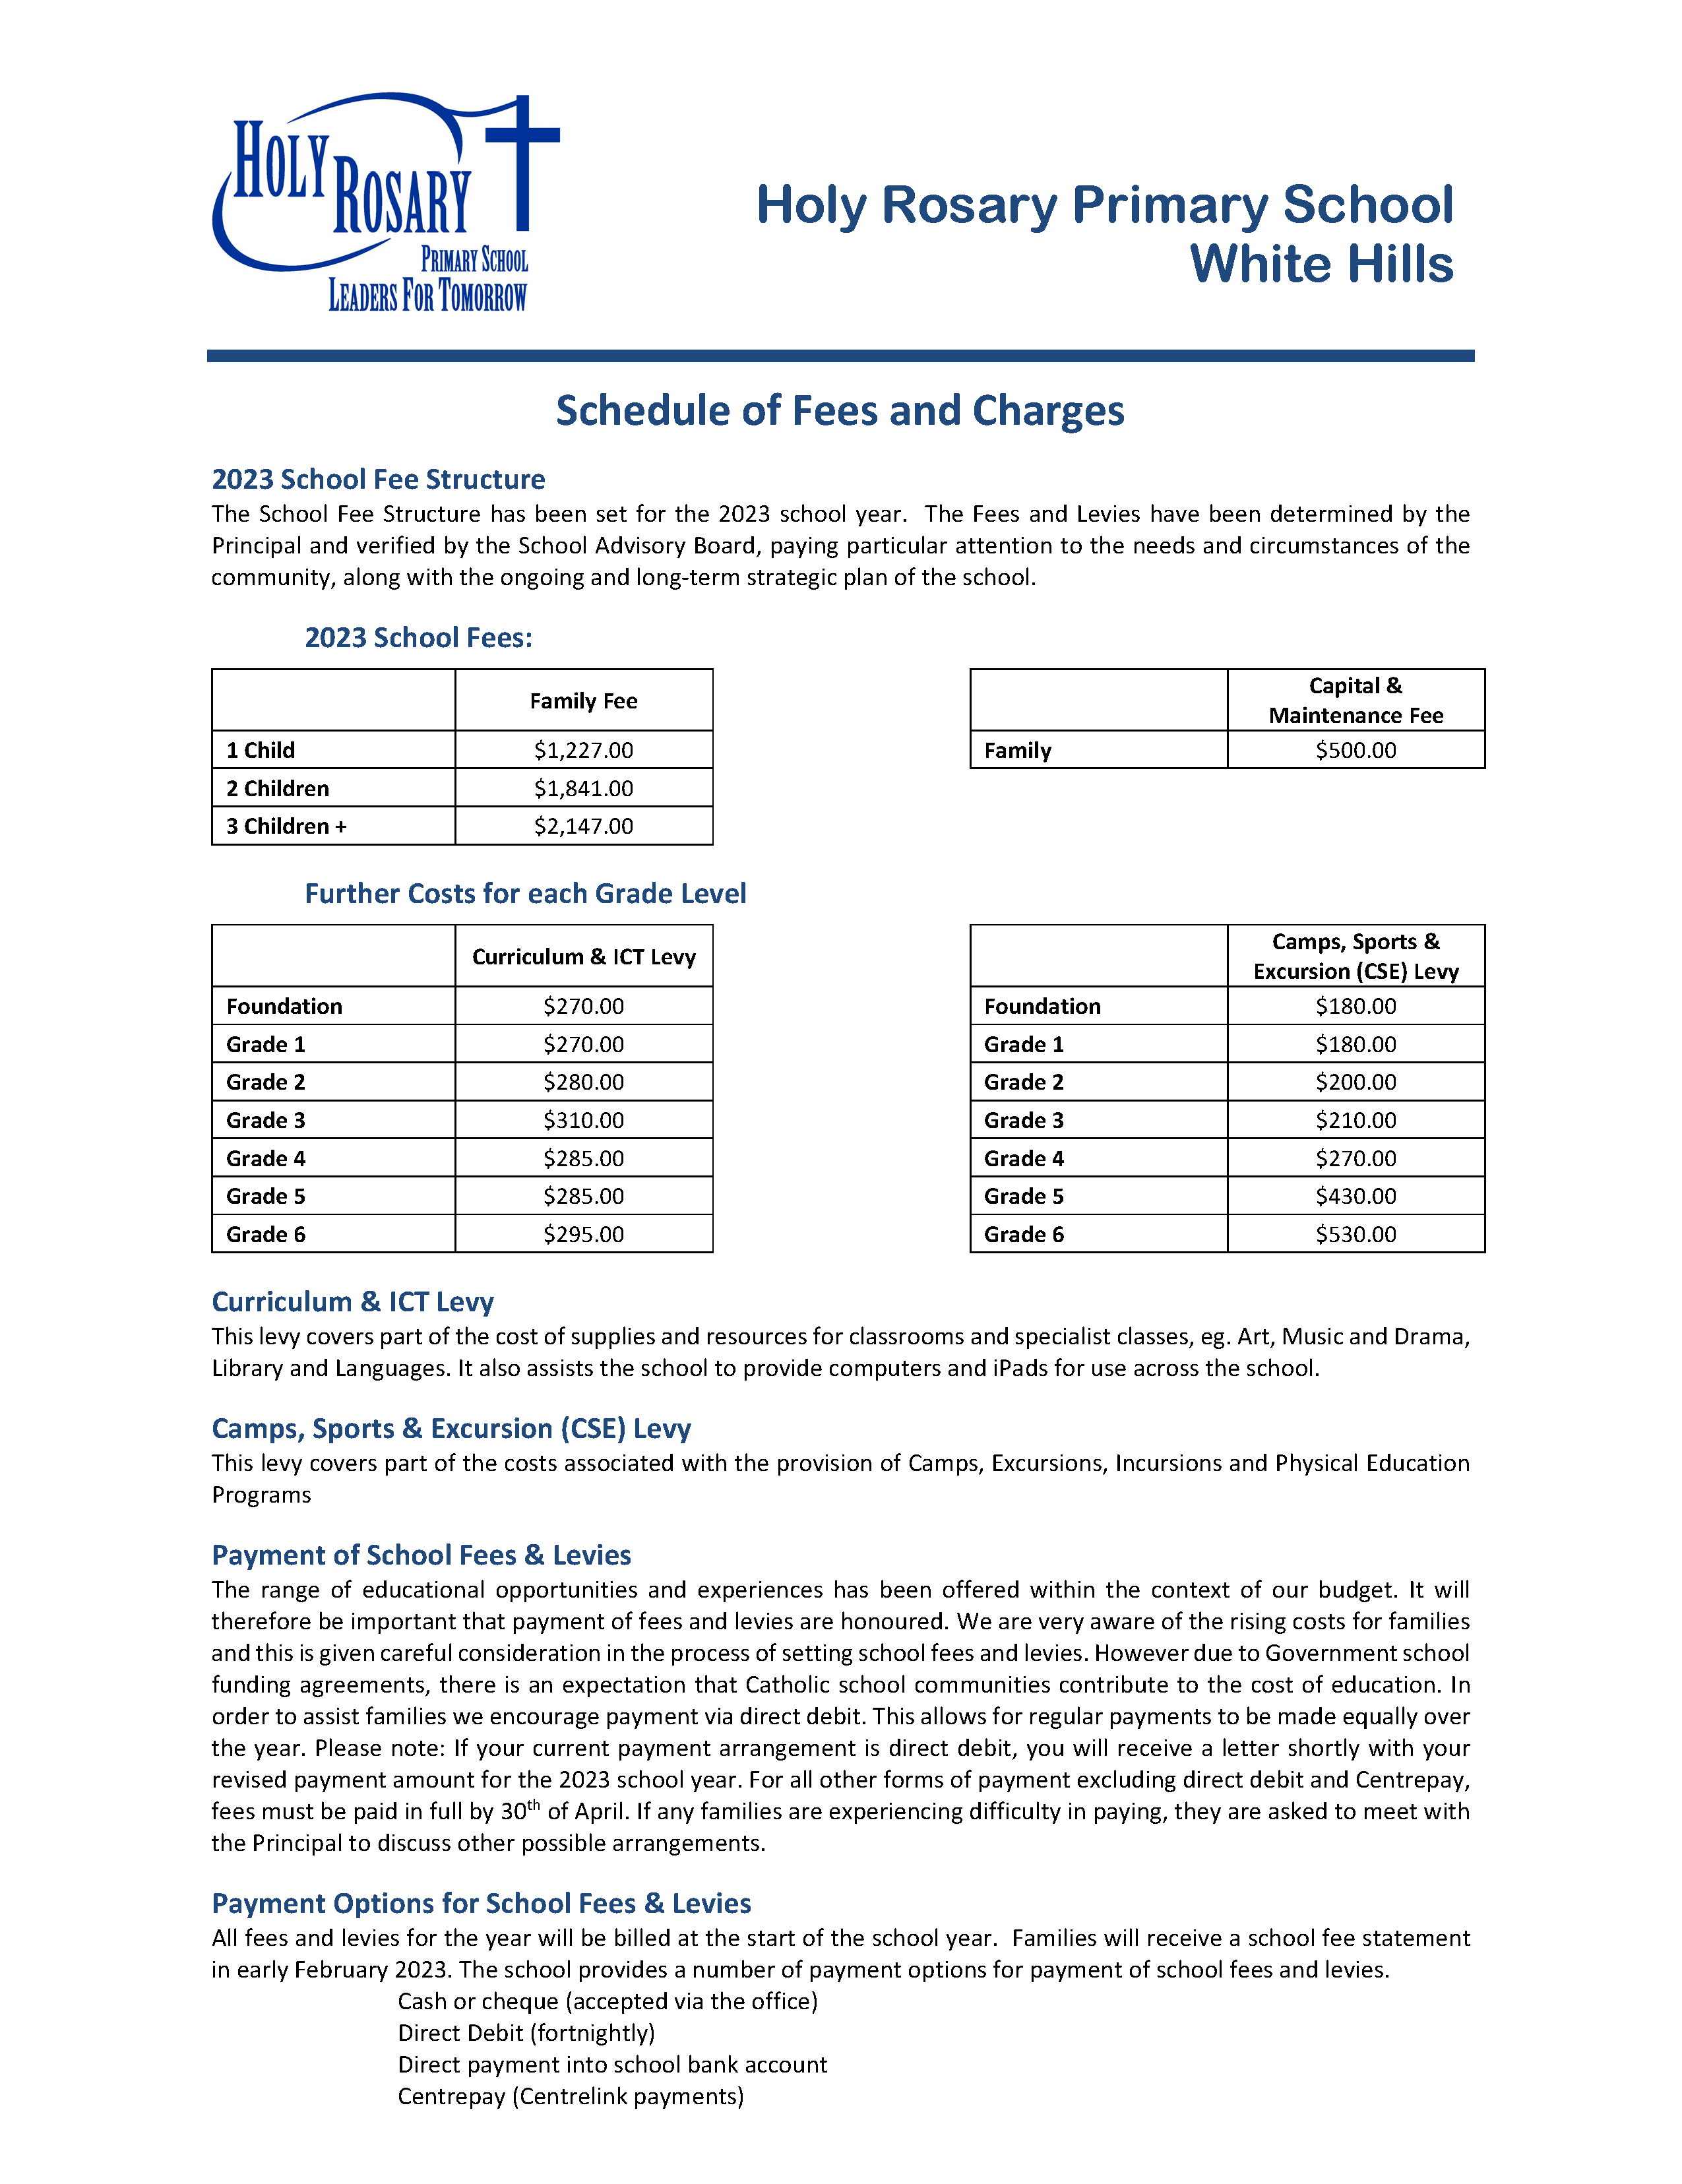 2023 Schedule of Fees Charges